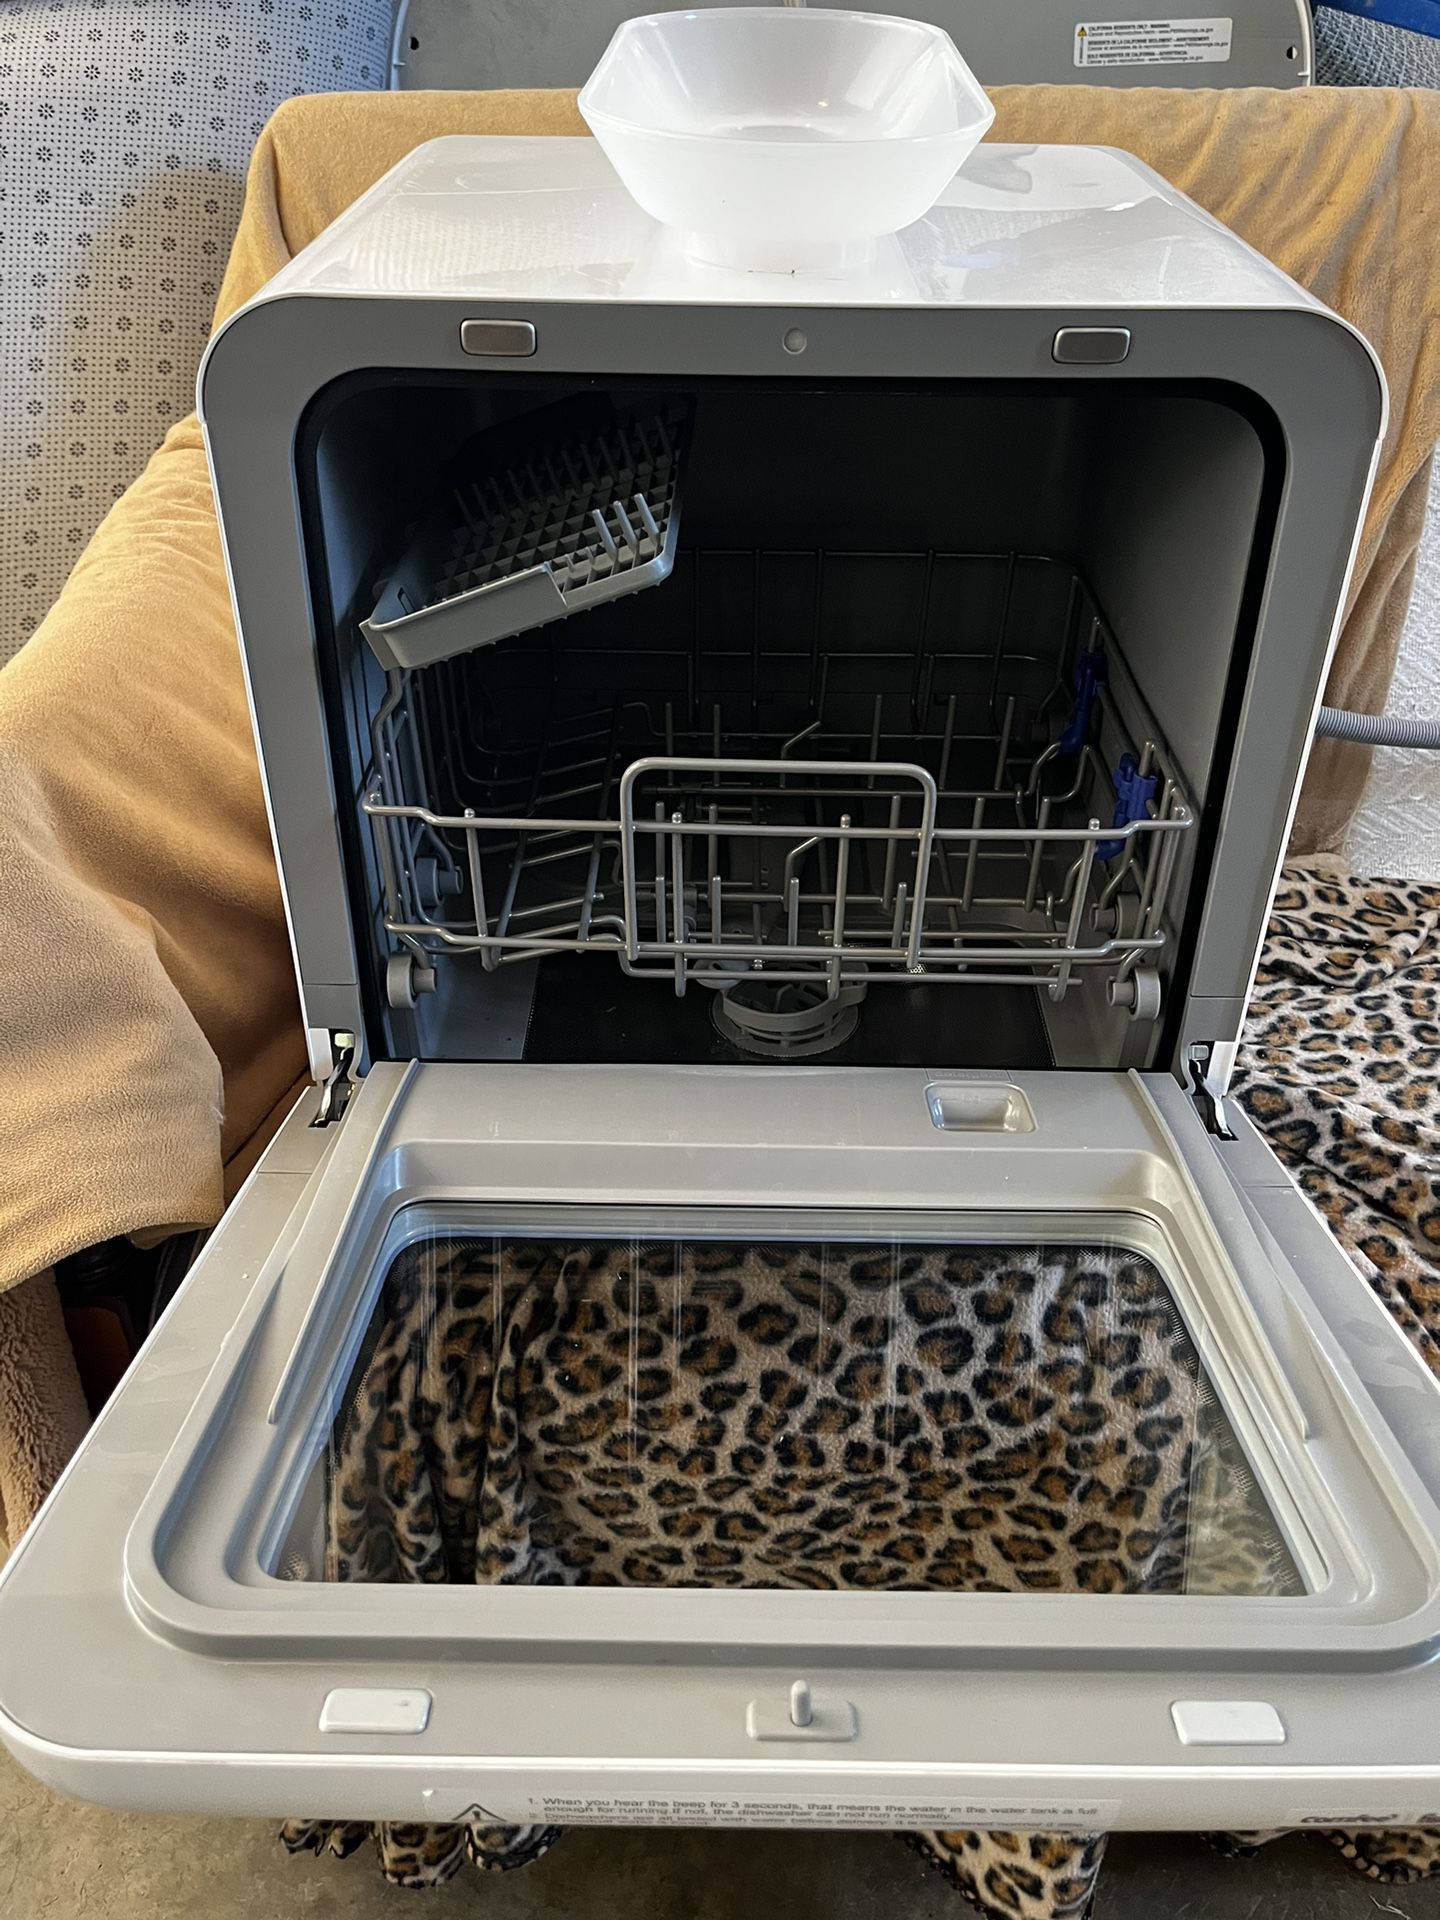 Comfee Countertop Dishwasher for Sale in Portland, OR - OfferUp